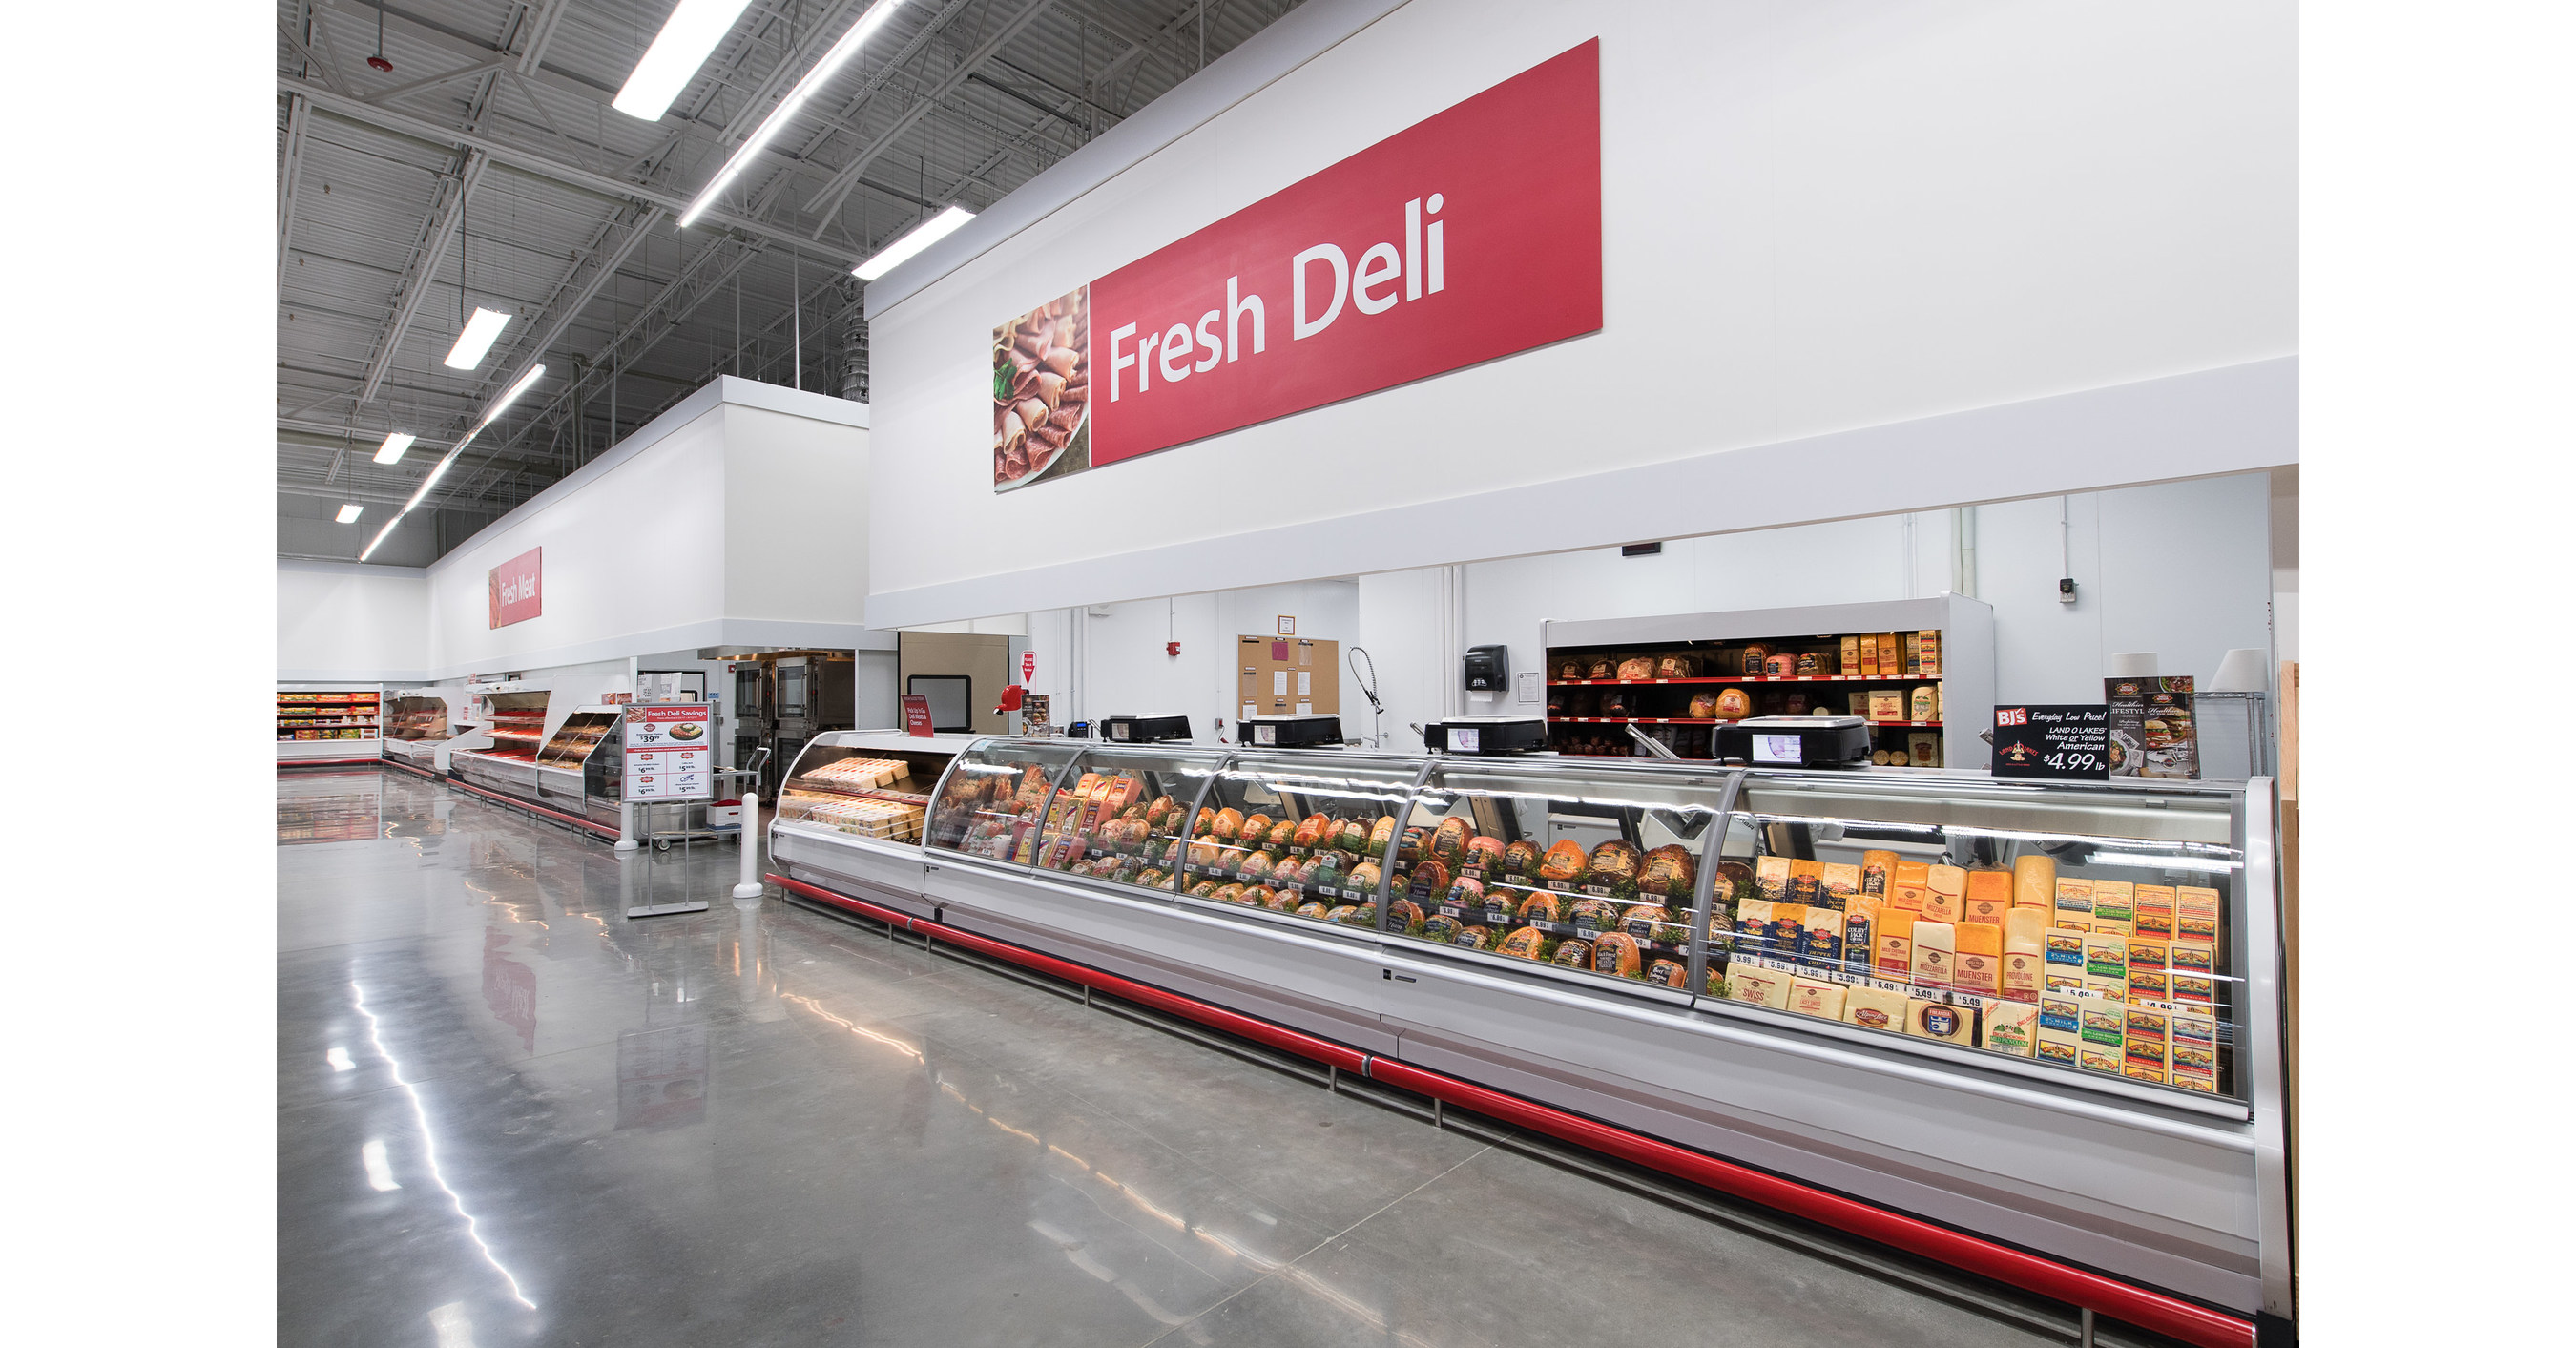 BJ's Wholesale Club releases first ESG report